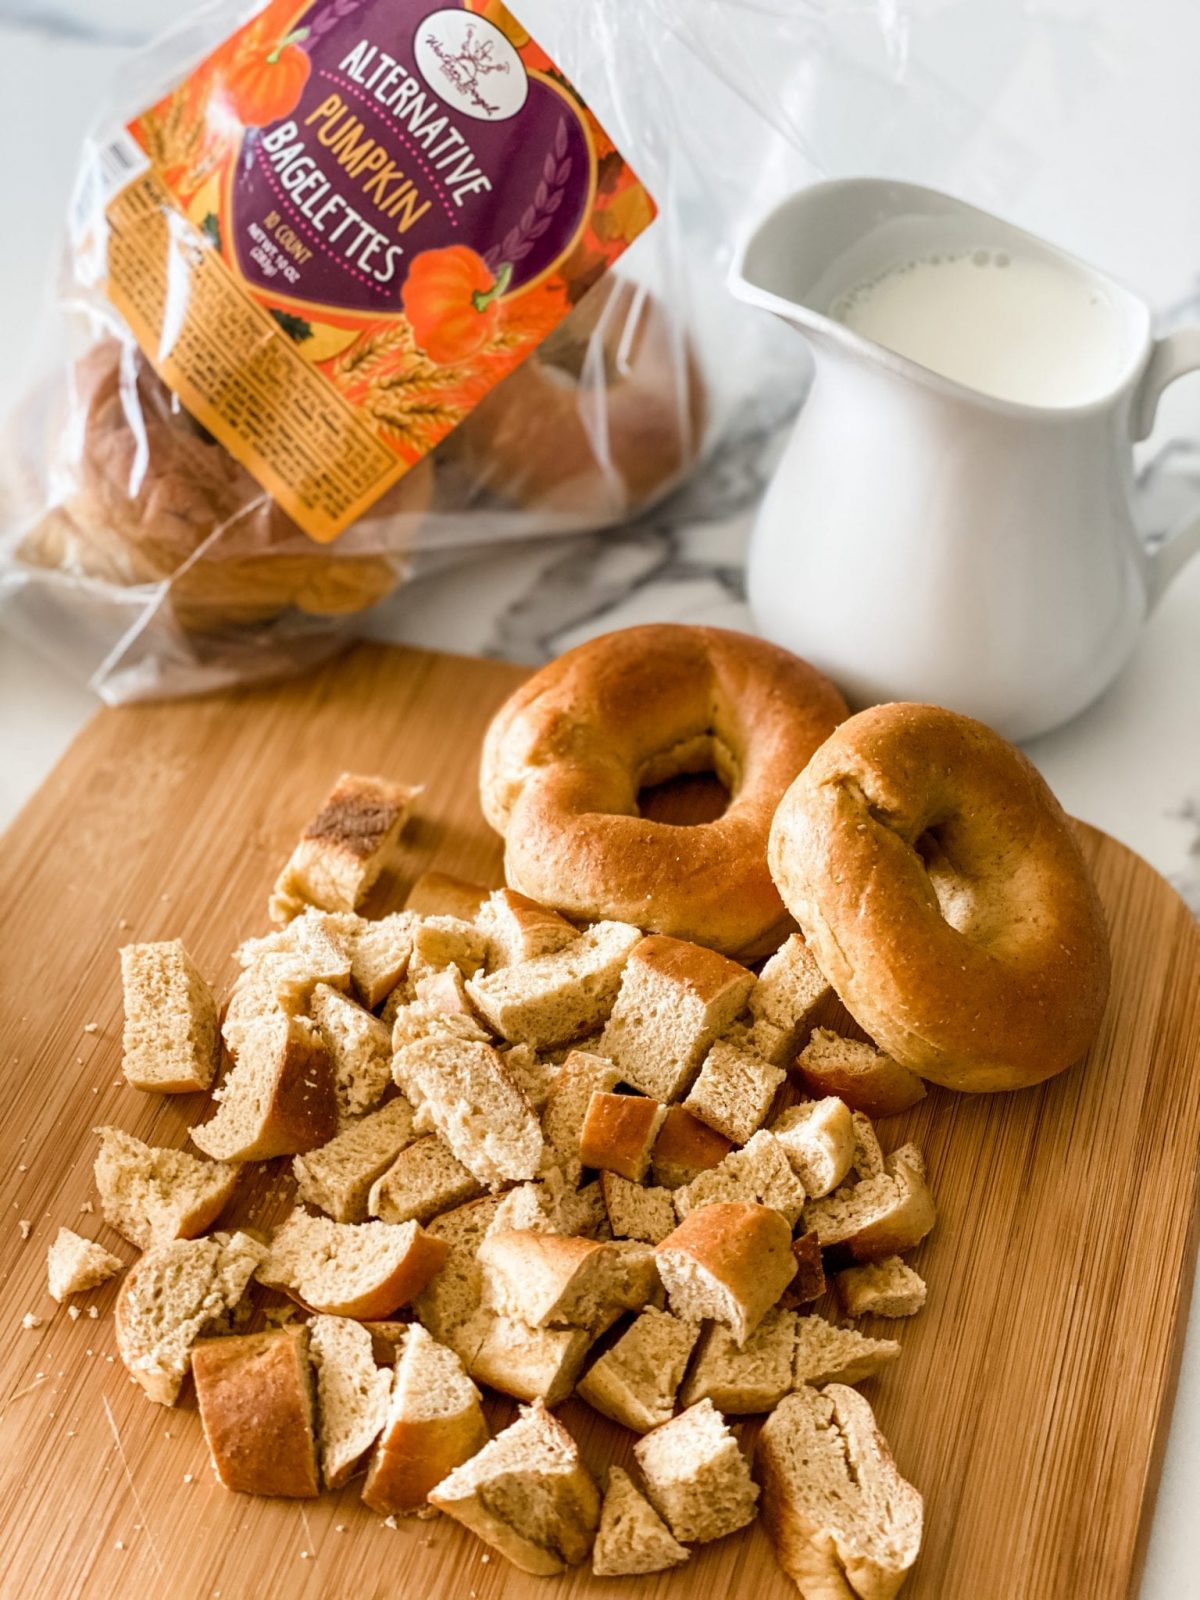 Western Bagels: Save 10% on your order with promo code: pounddropper